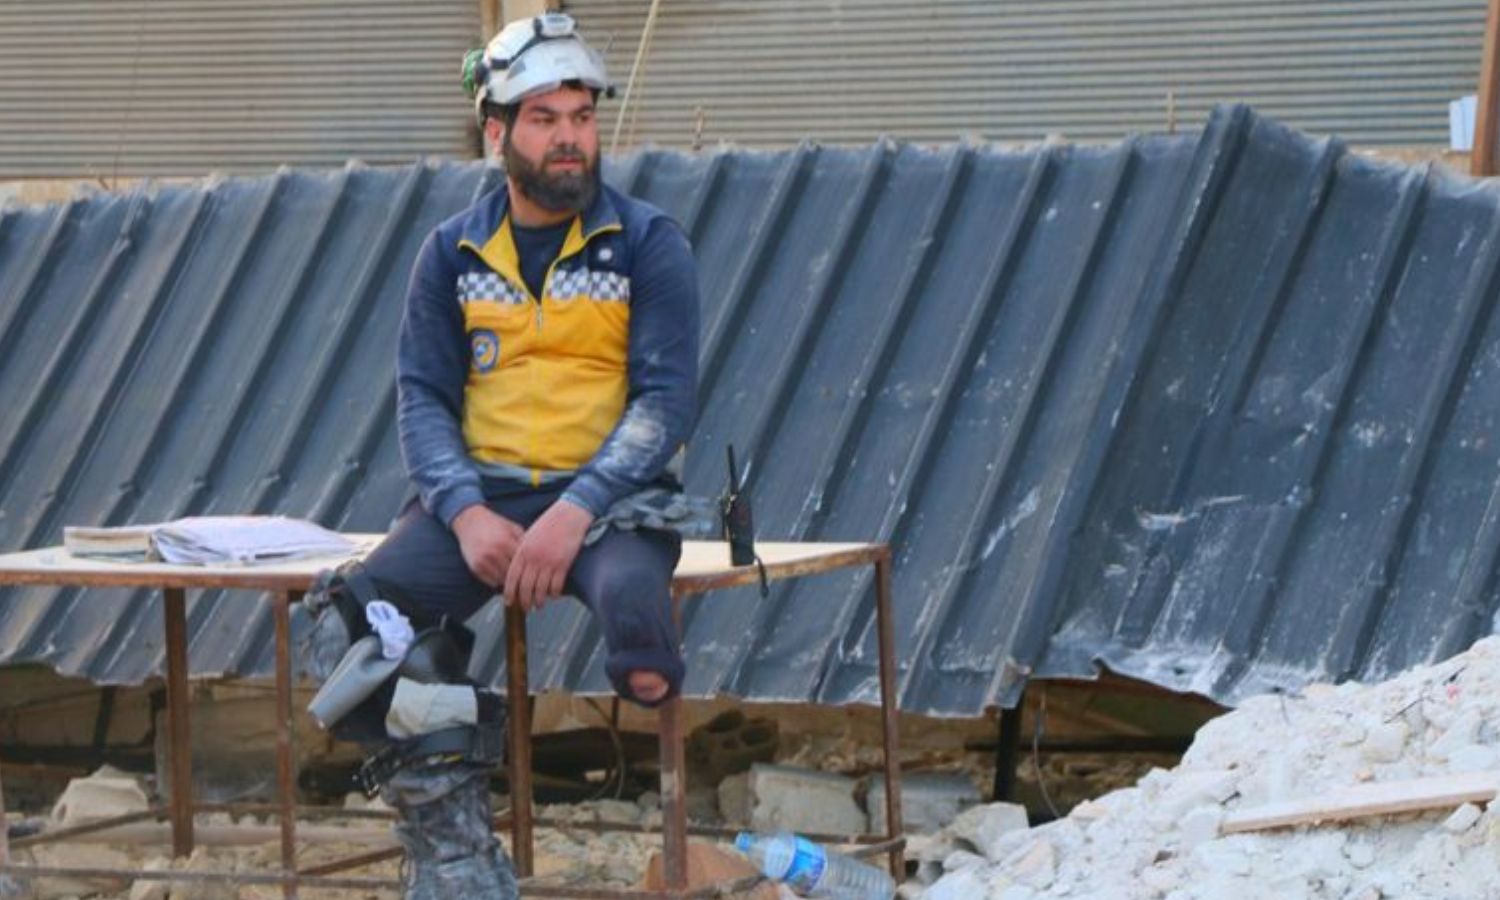 Volunteer for the Syria Civil Defense Hassan al-Talfah sits, with his prosthetic limb next to him, to rest after rescuing people trapped under the rubble following the earthquake in the countryside of Idlib - February 12, 2023 (Hatim al-Khader/Facebook)